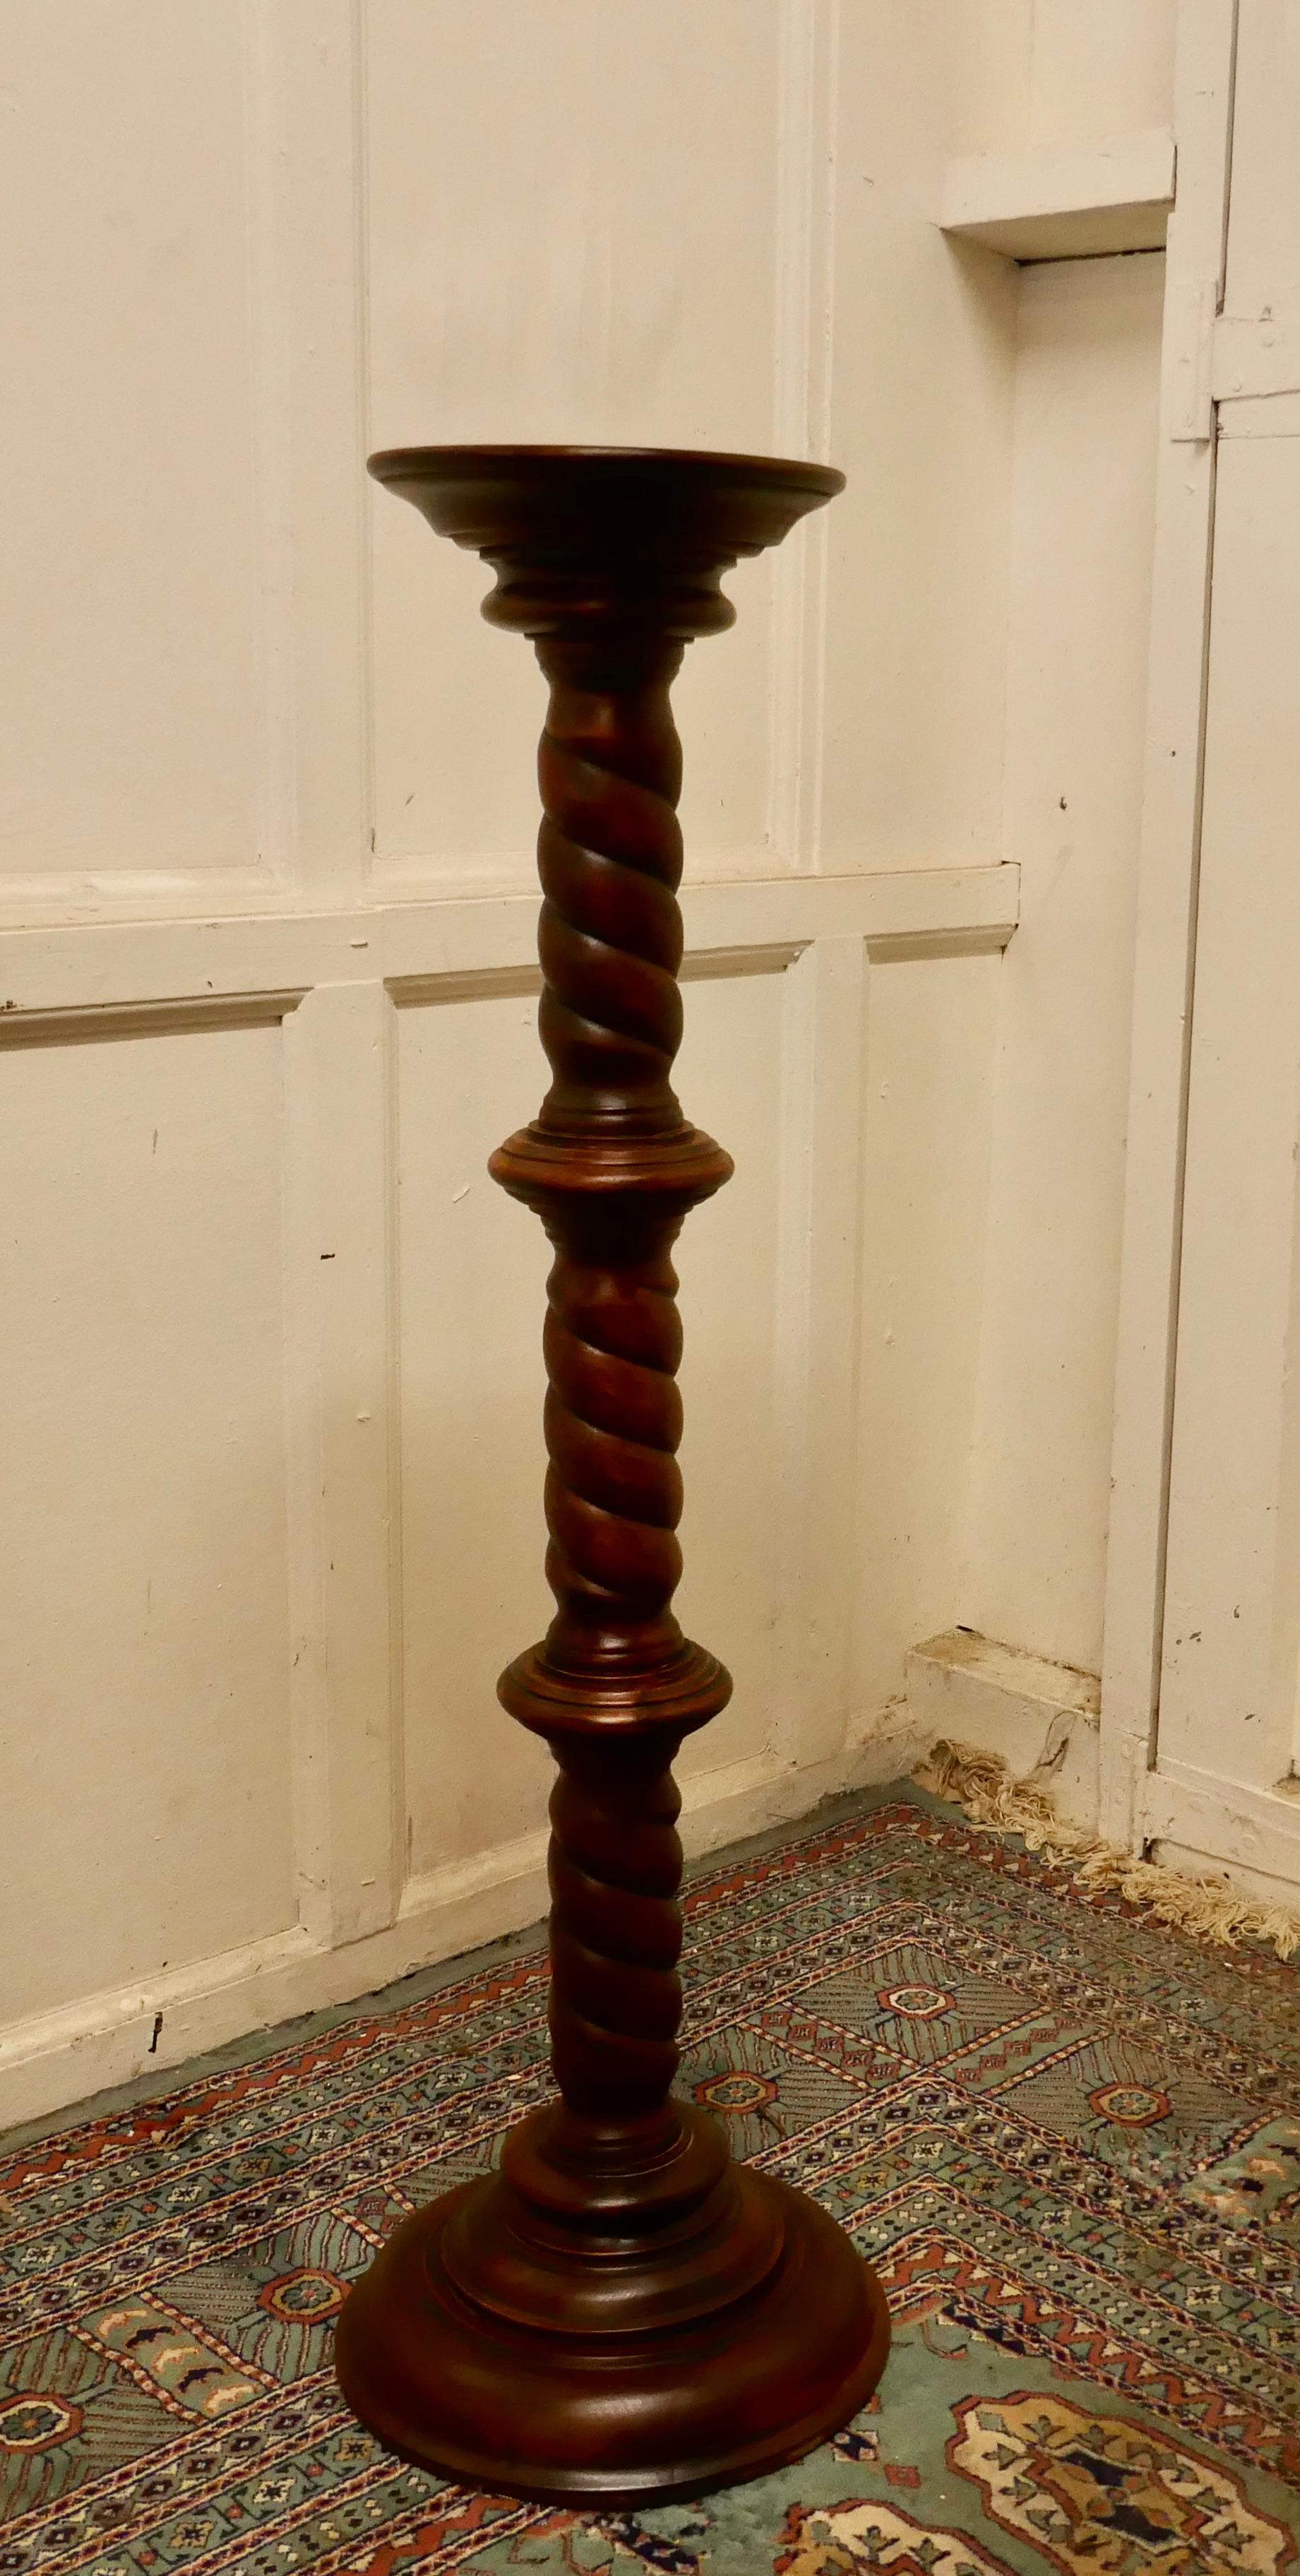 19th century carved mahogany pedestal torchere

The column has a barley twist turning, both top and bottom are round, the top has a small lip and the base is stepped 
The Column is in the Classical style and has a multitude of uses, for a lamp,